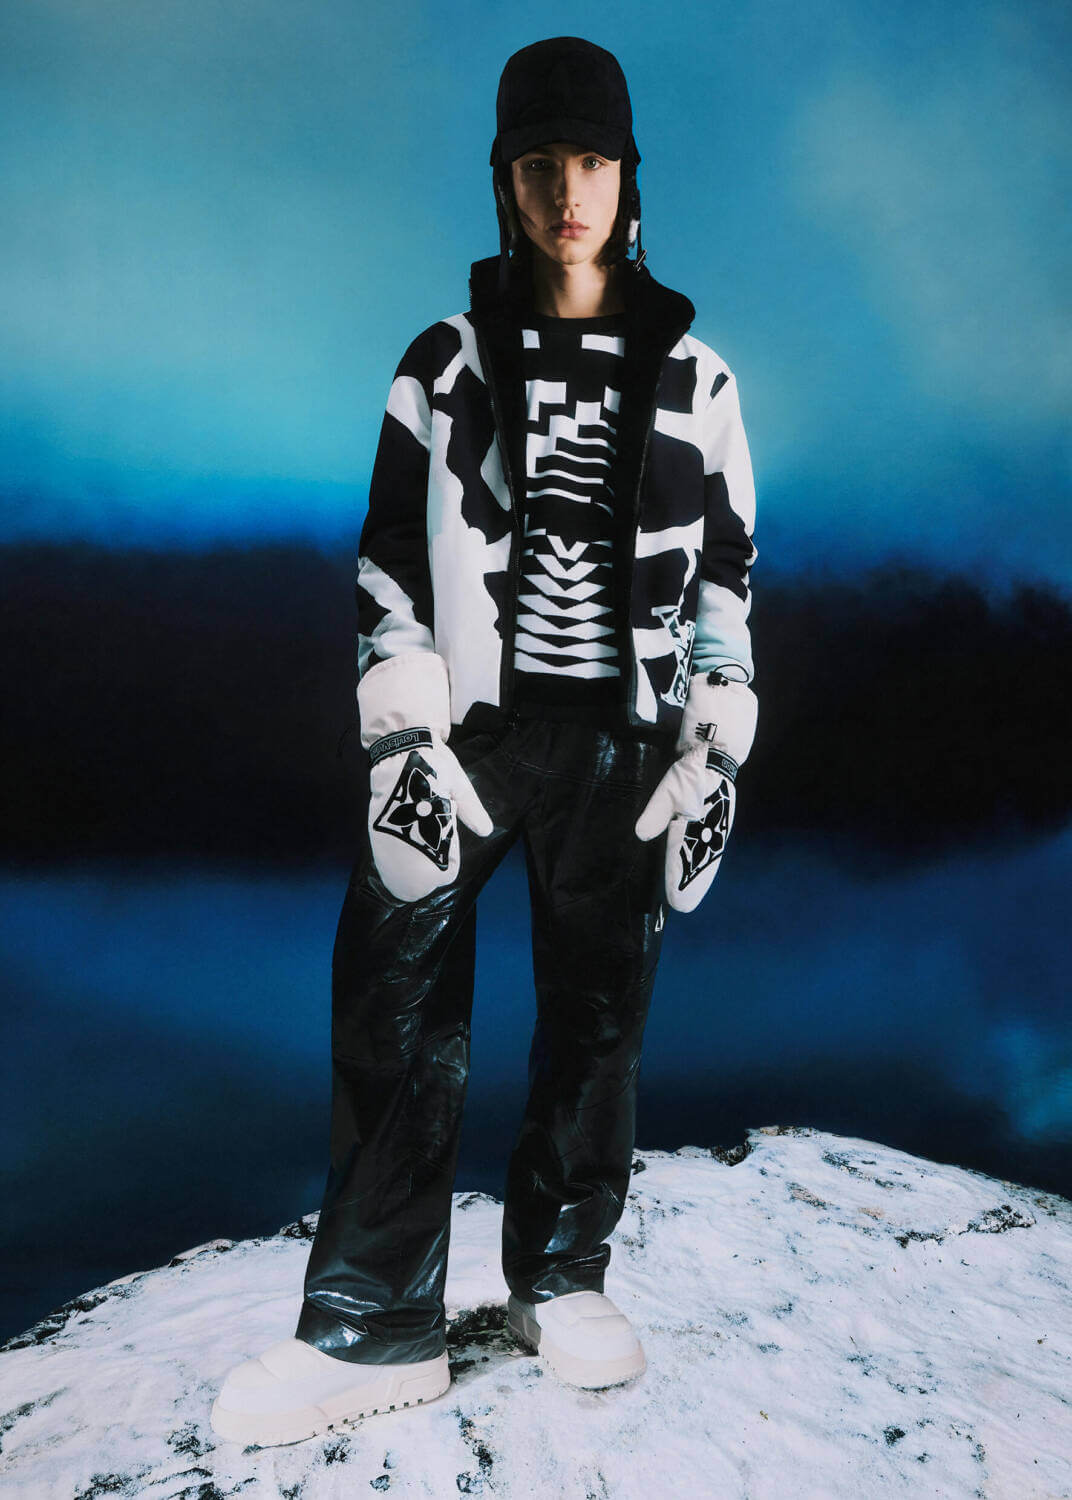 Louis Vuitton's latest ski capsule includes a snowboard and skis